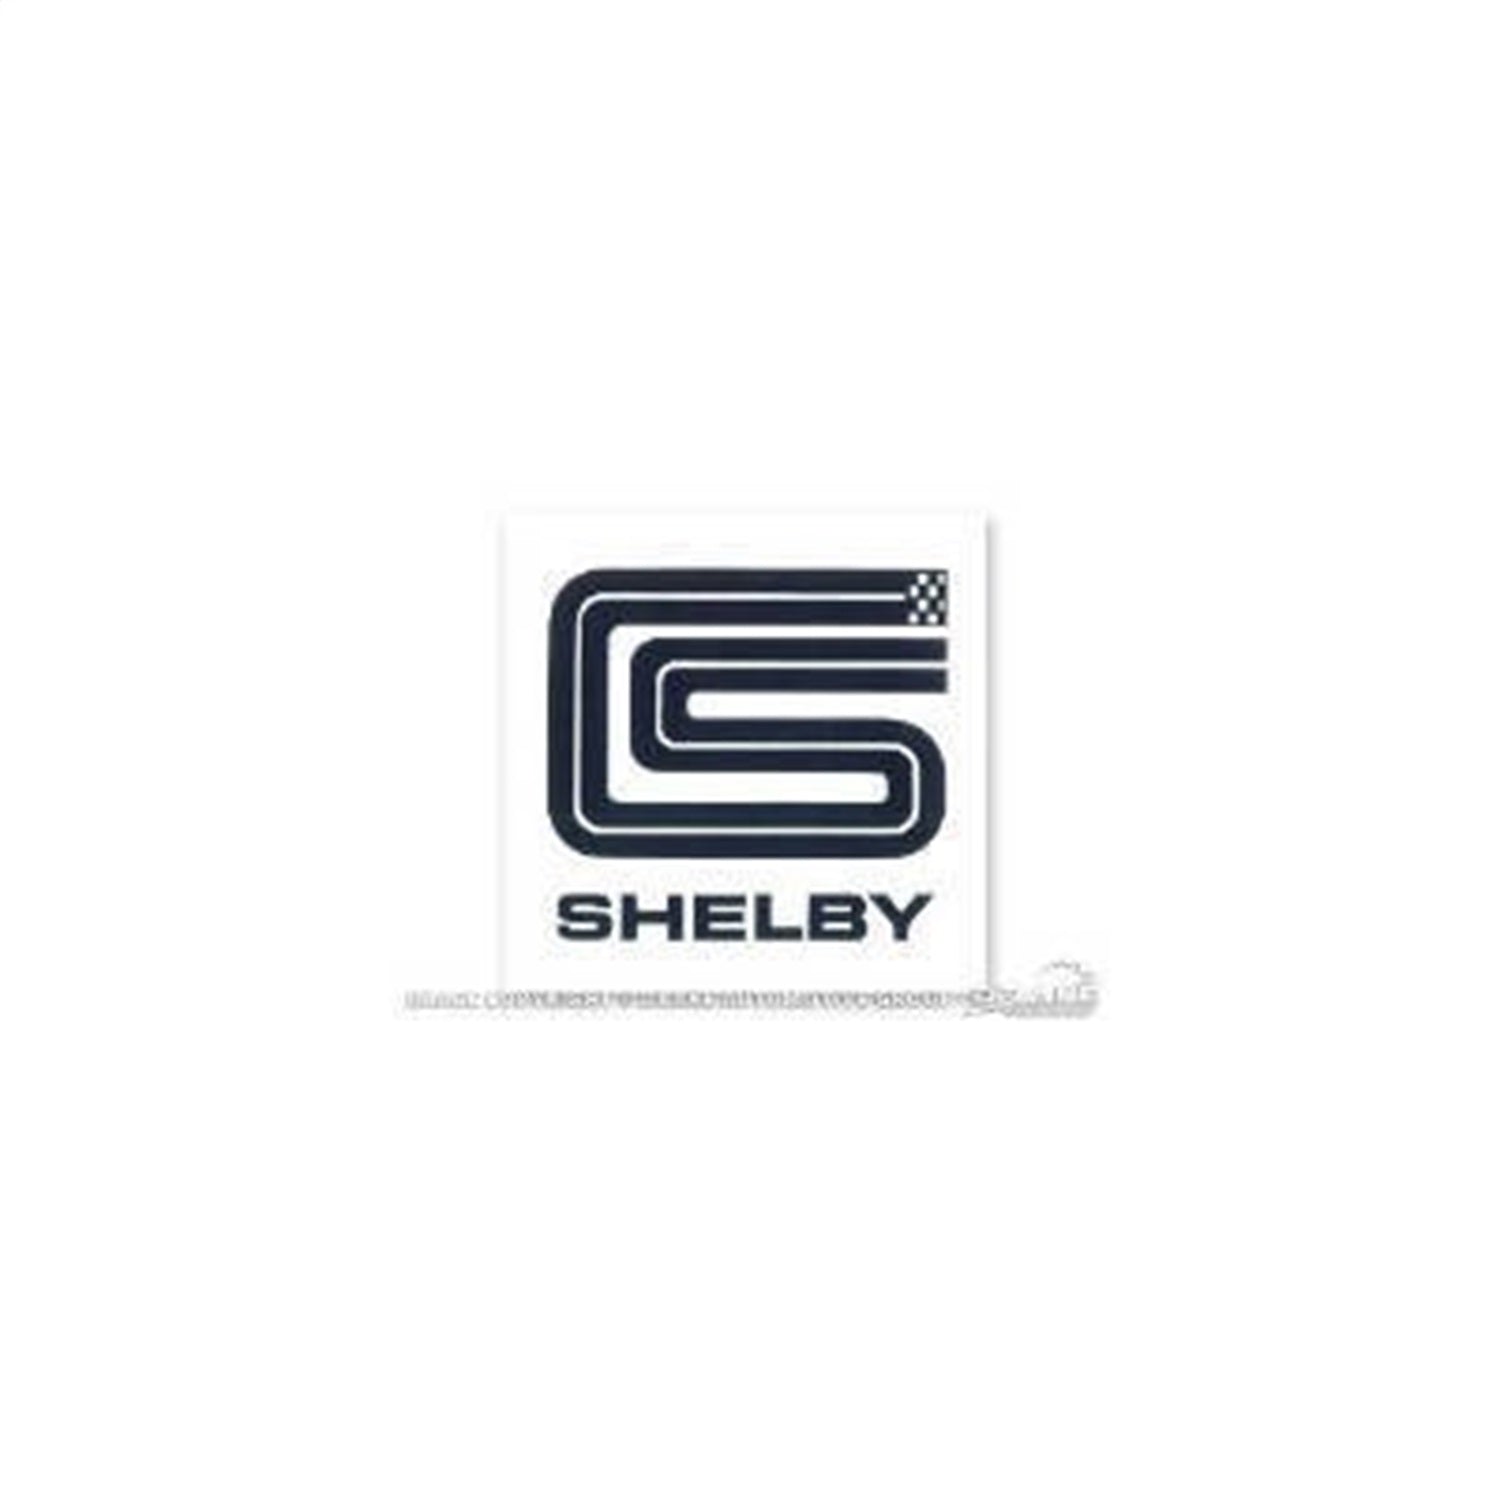 Shelby Square Decal